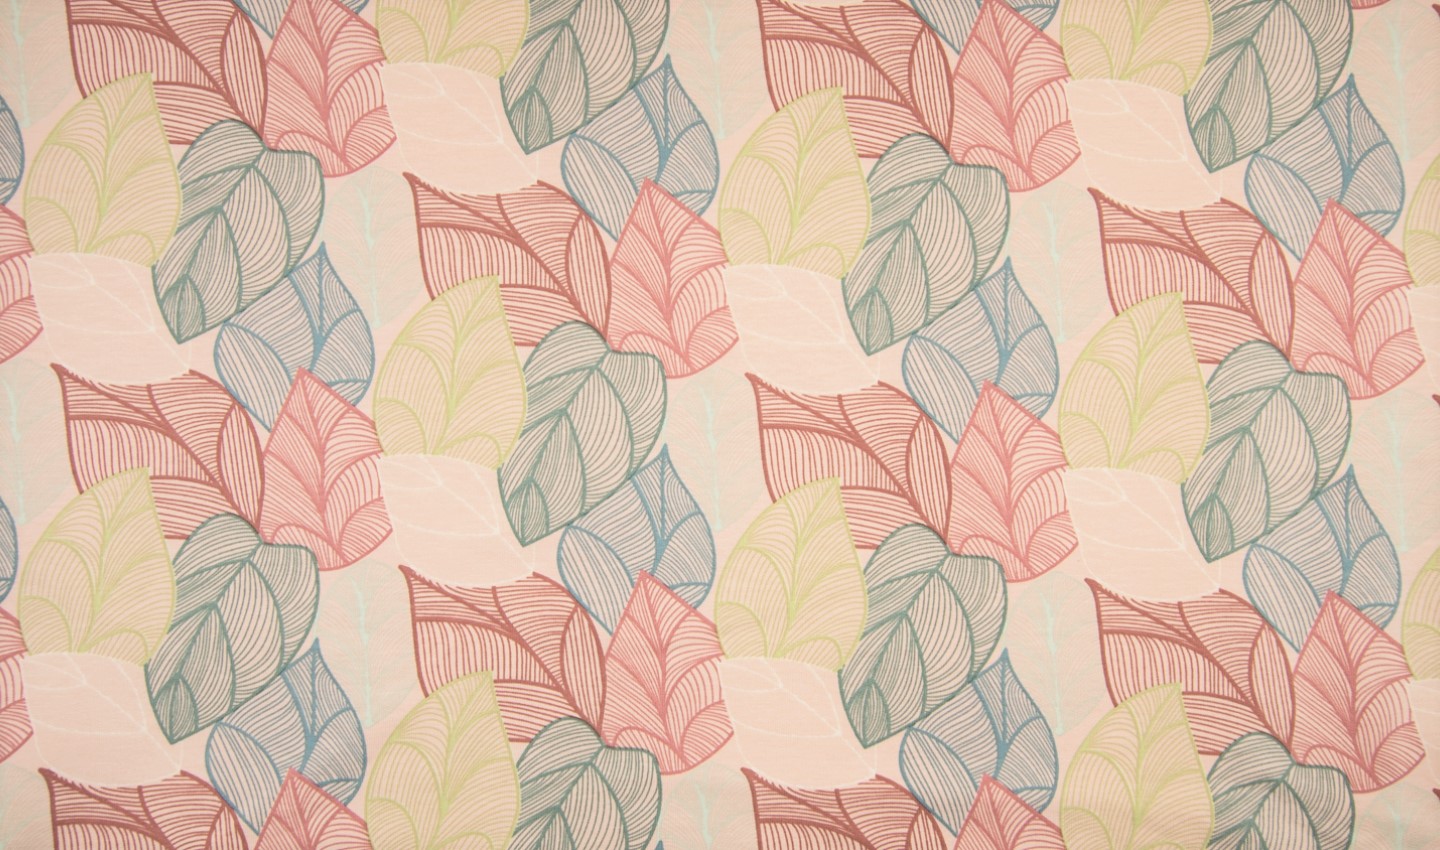 Sommersweat Organic Cotton "Big Leaves" - dusty rose